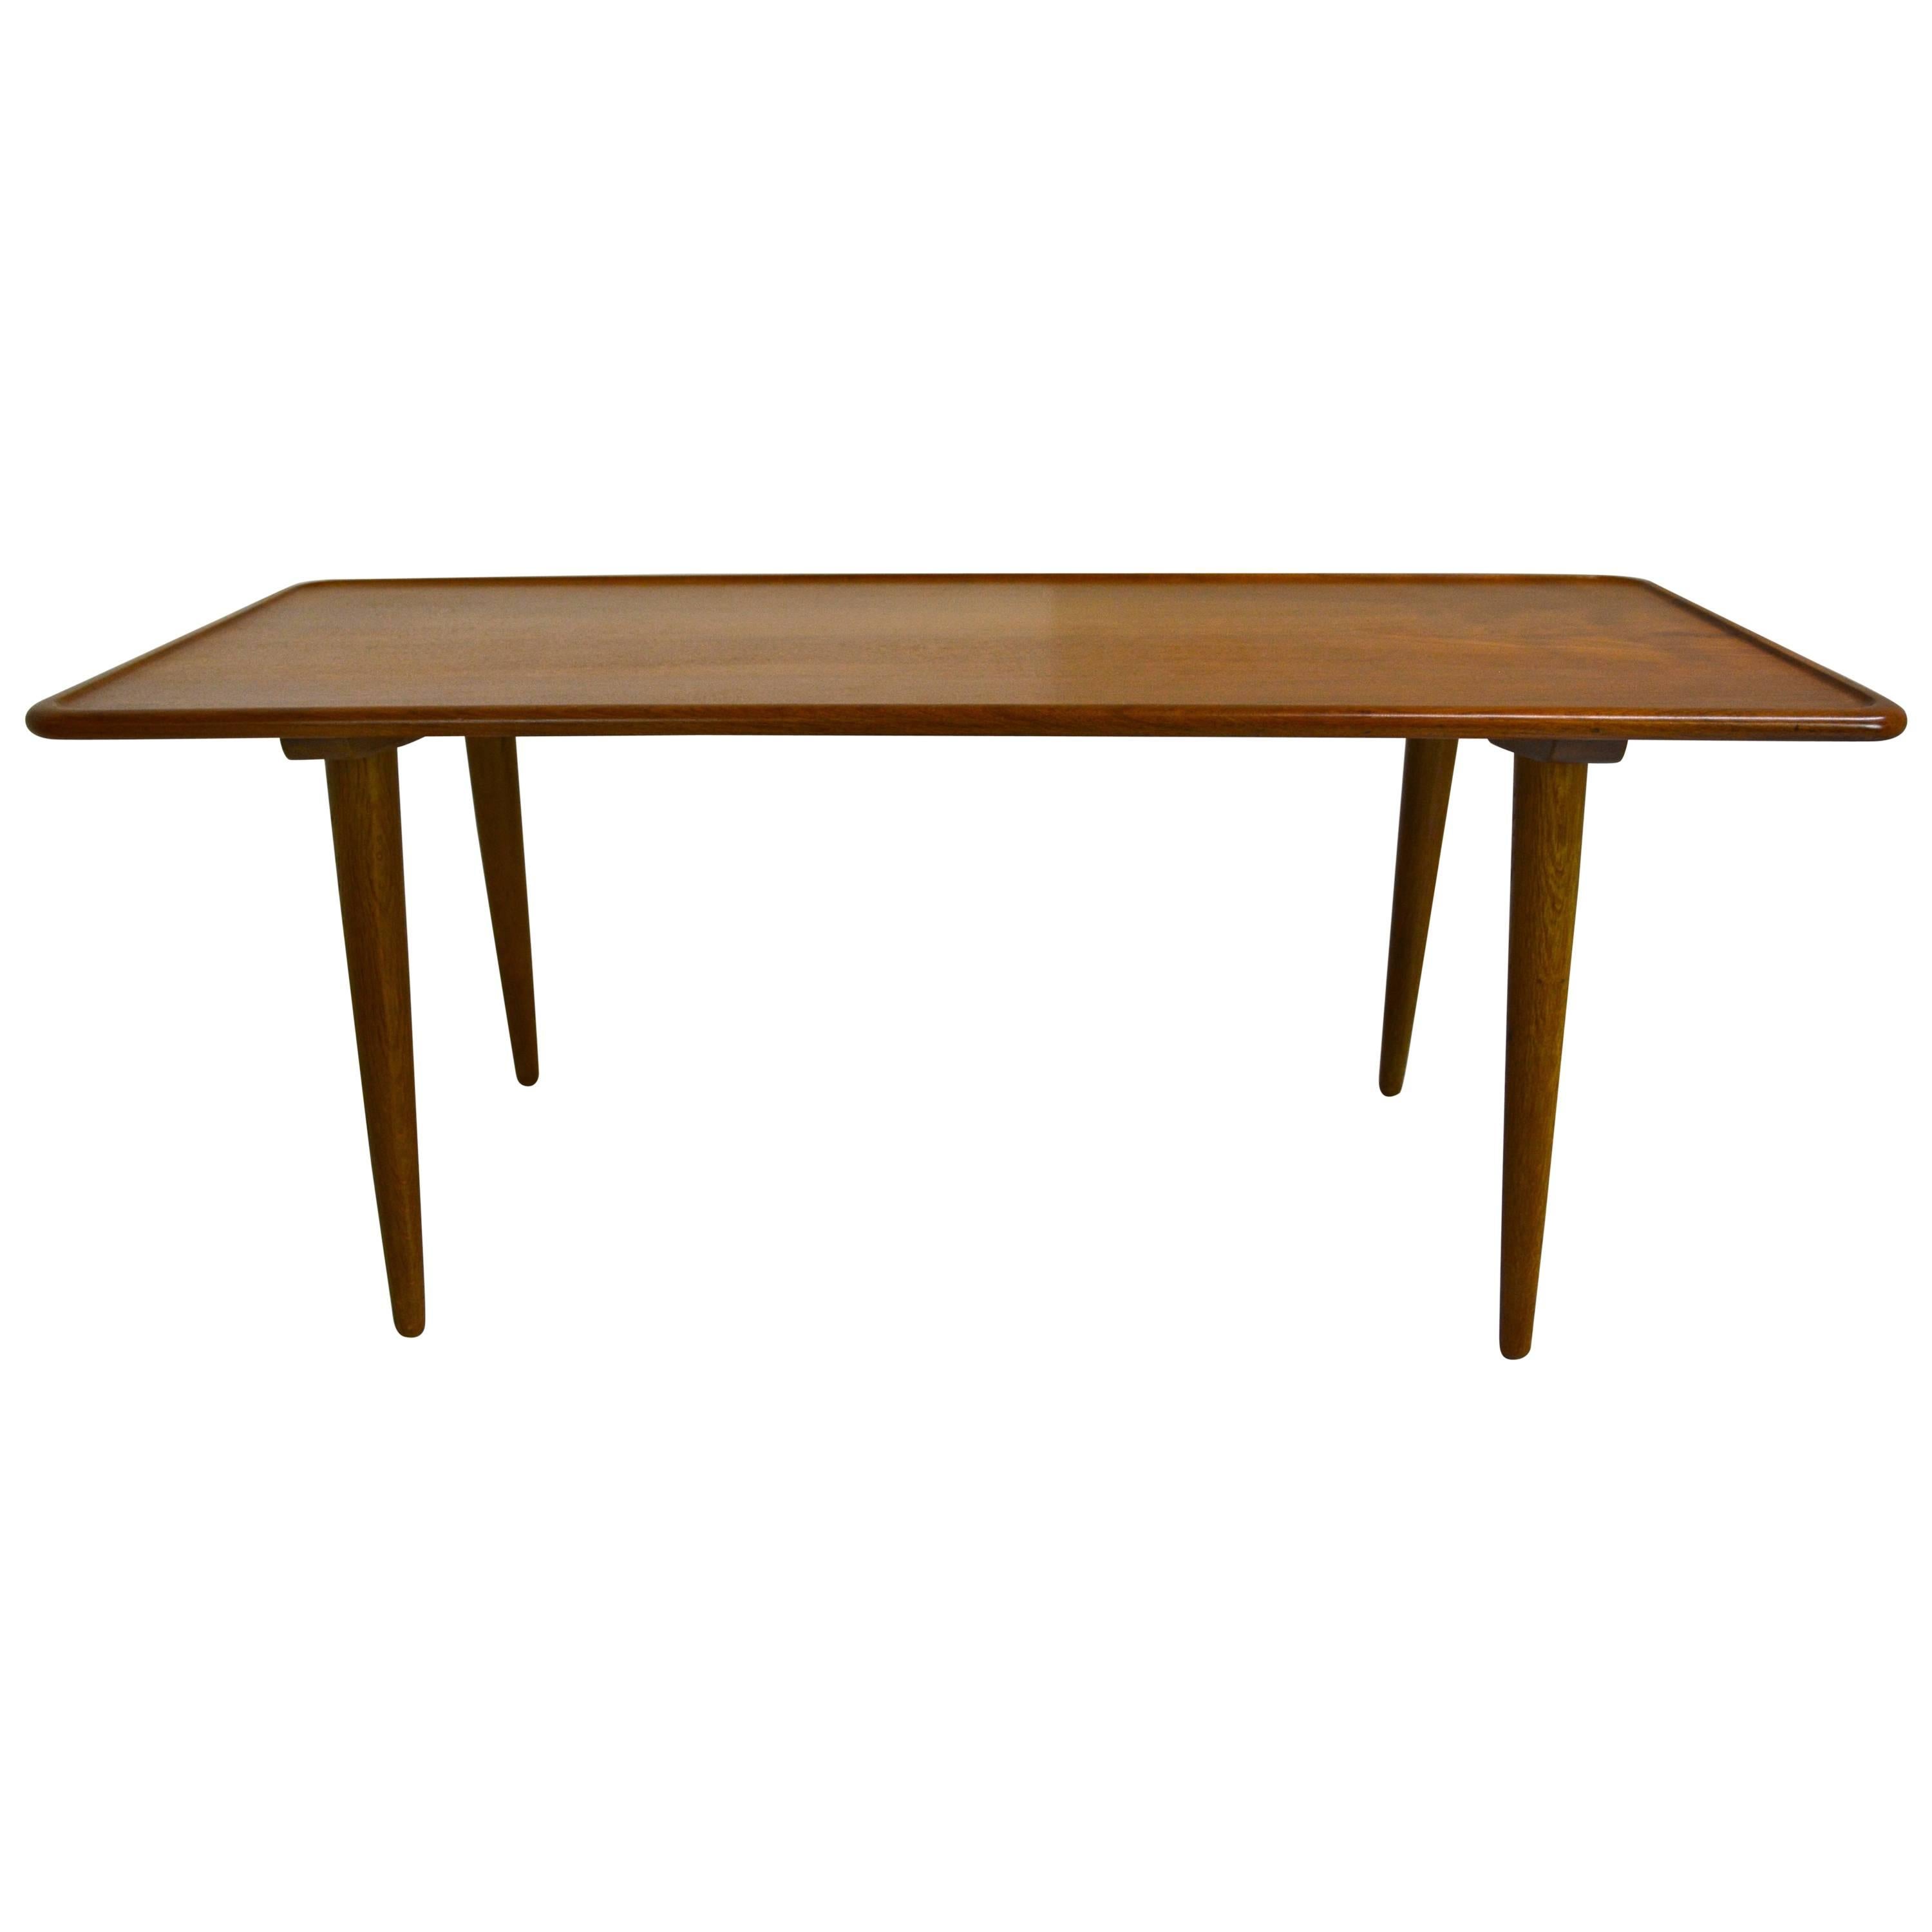 Tall Coffee Table by Hans Wegner for Andreas Tuck